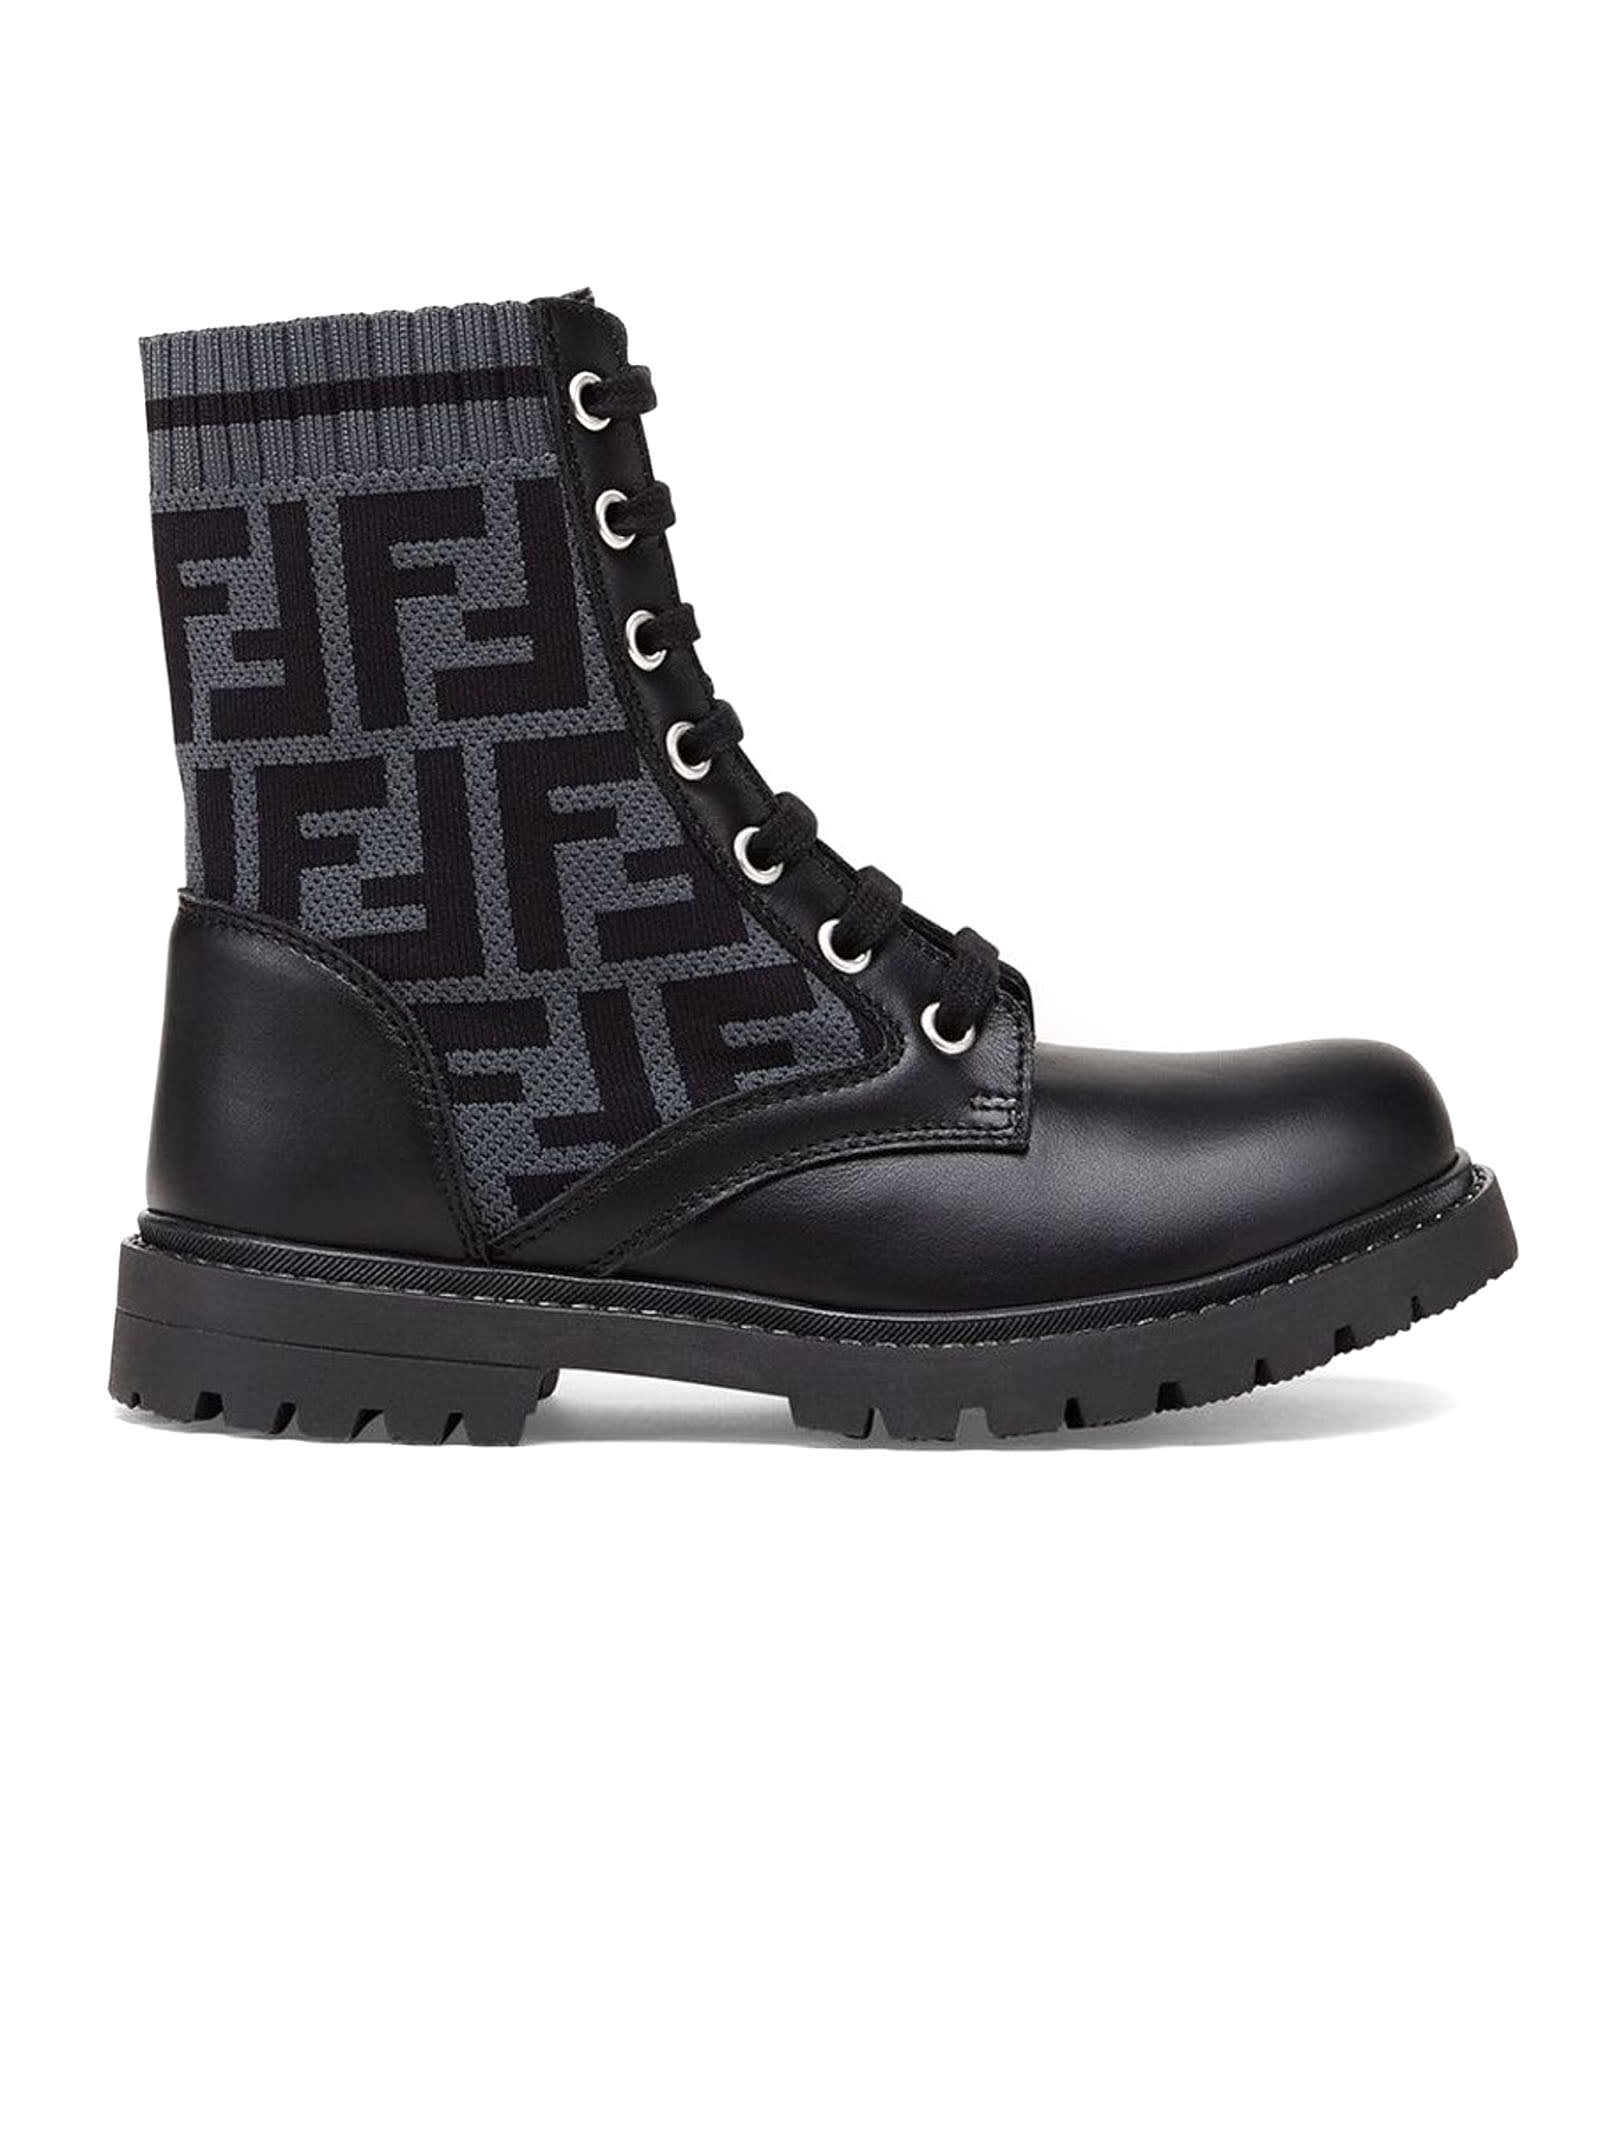 Fendi Black And Grey Leather Ankle Boots